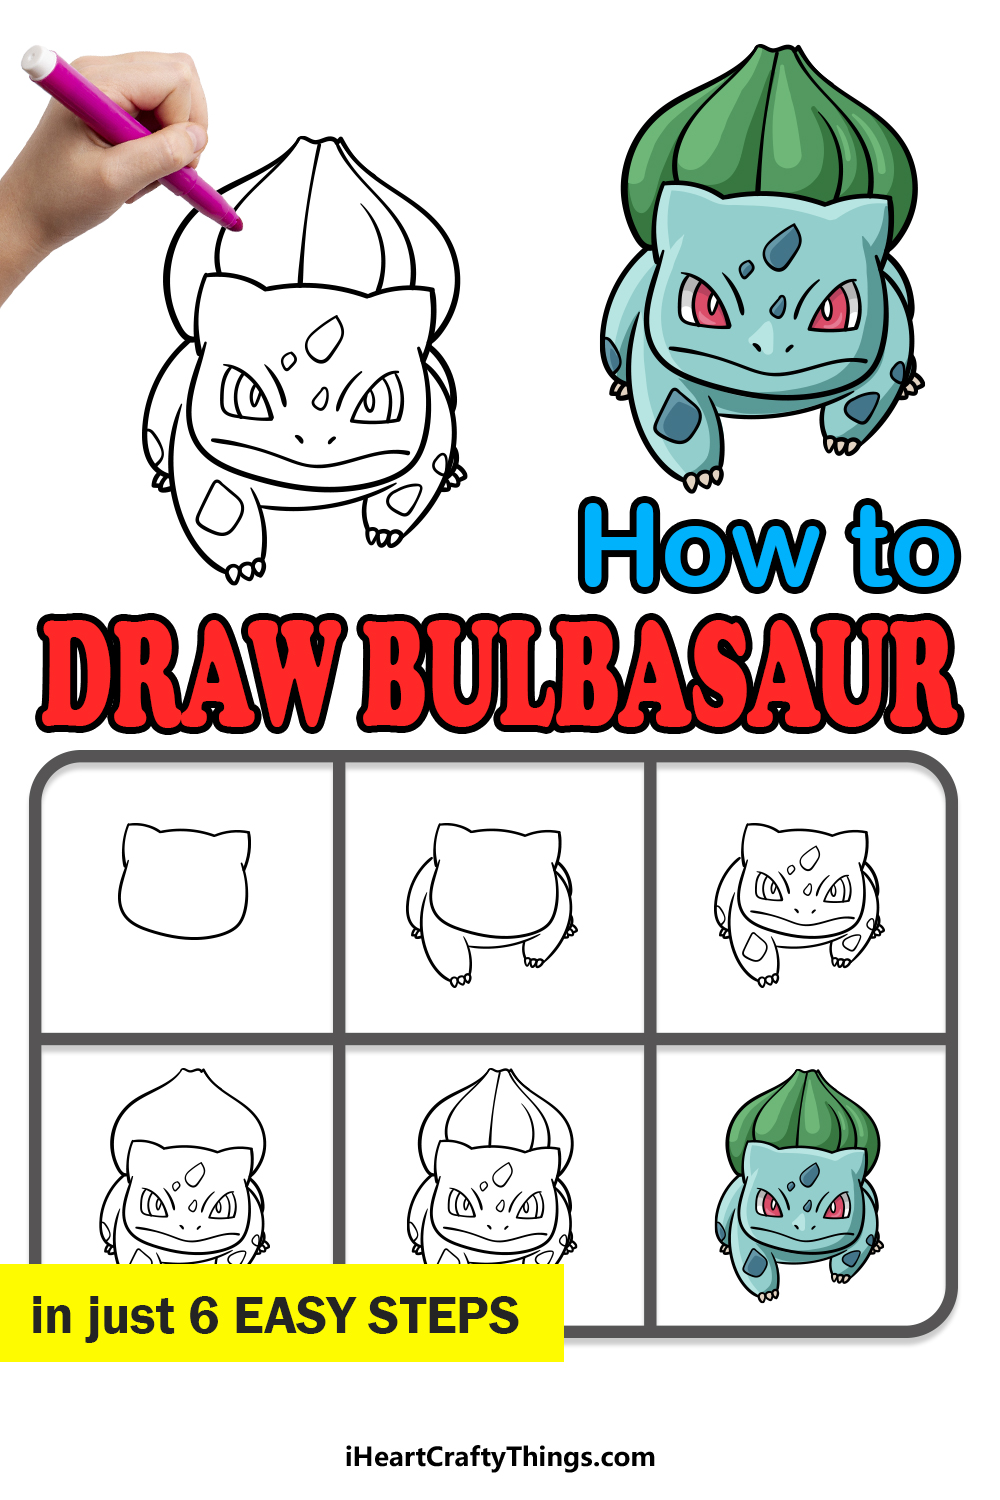 how to draw Bulbasaur in 6 easy steps